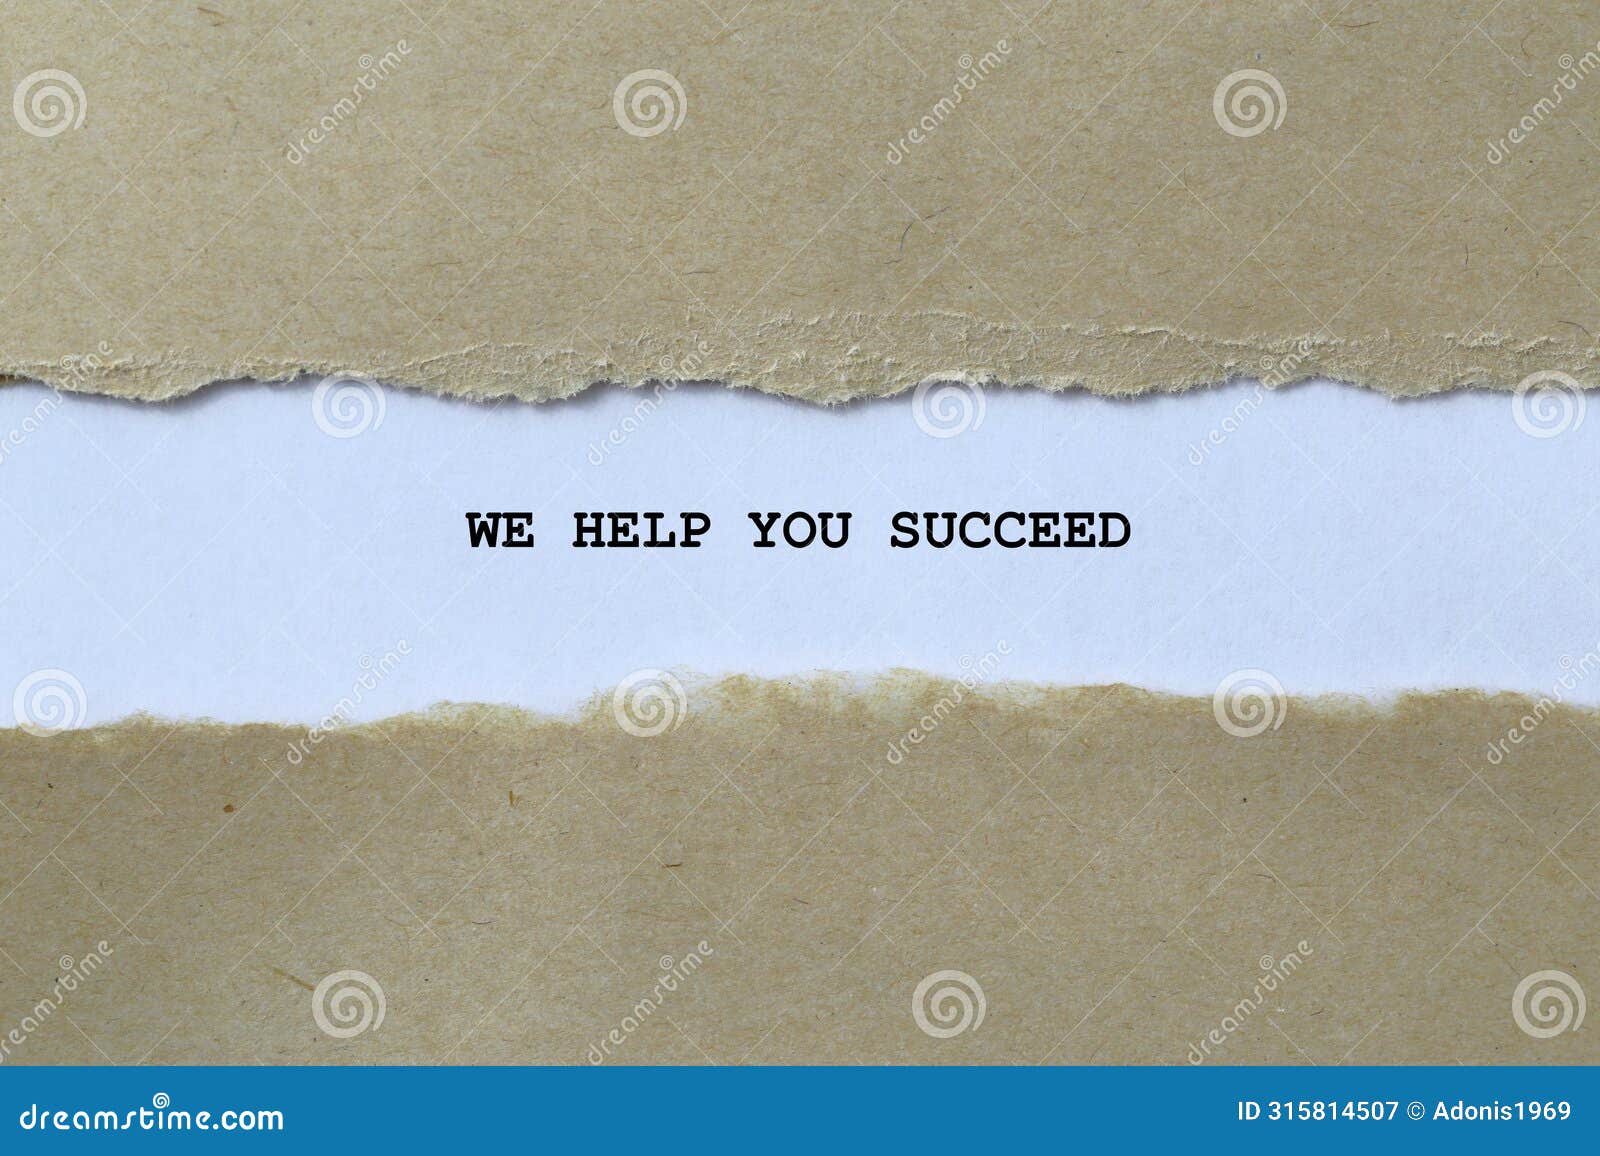 we help you succeed on white paper